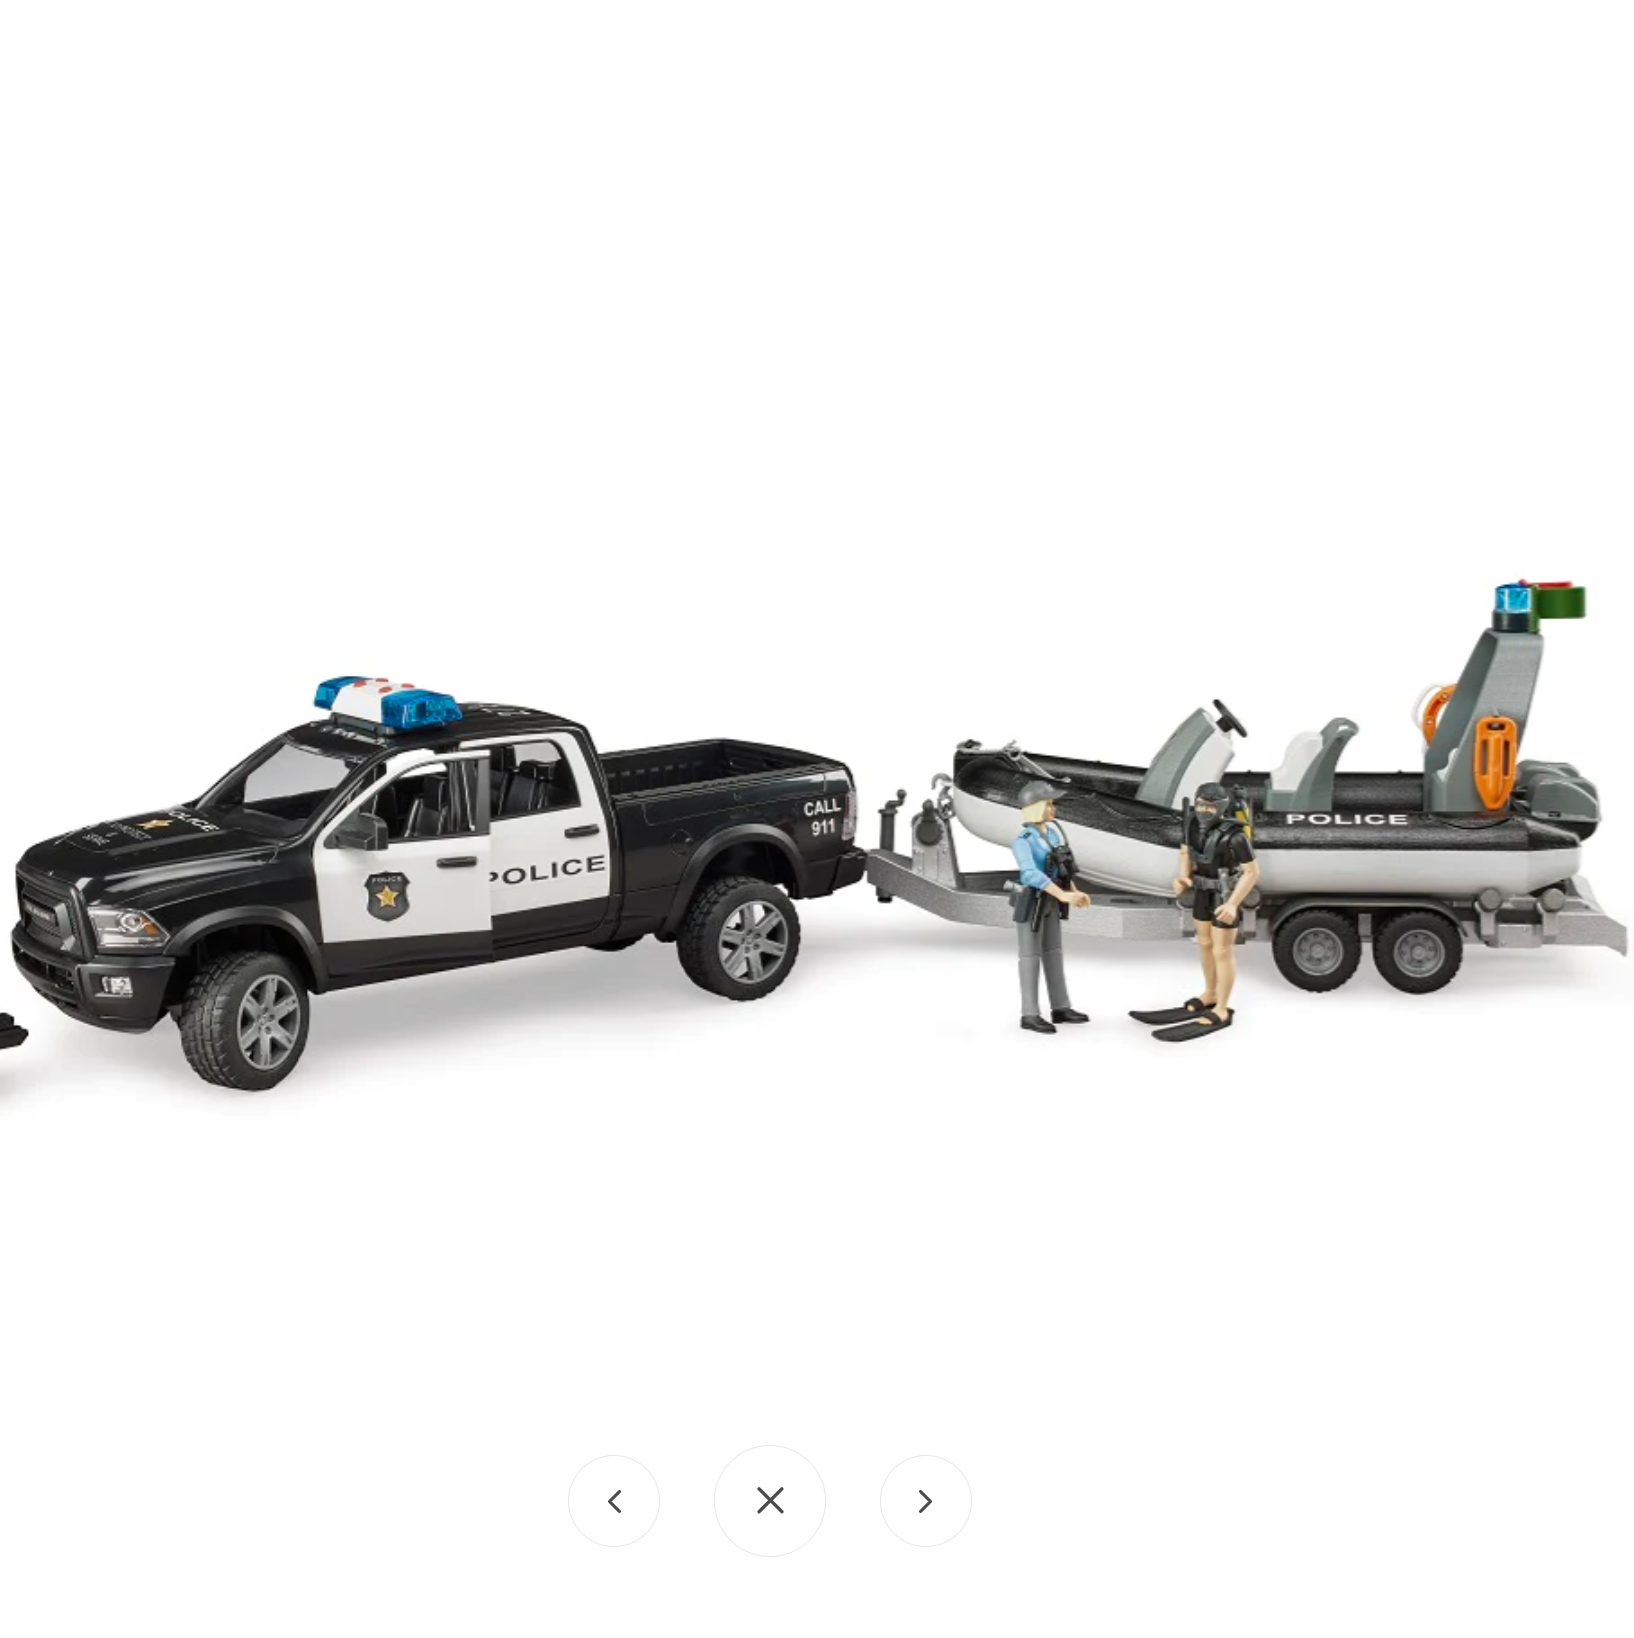 02507 RAM 2500 Power Trailer with Boat